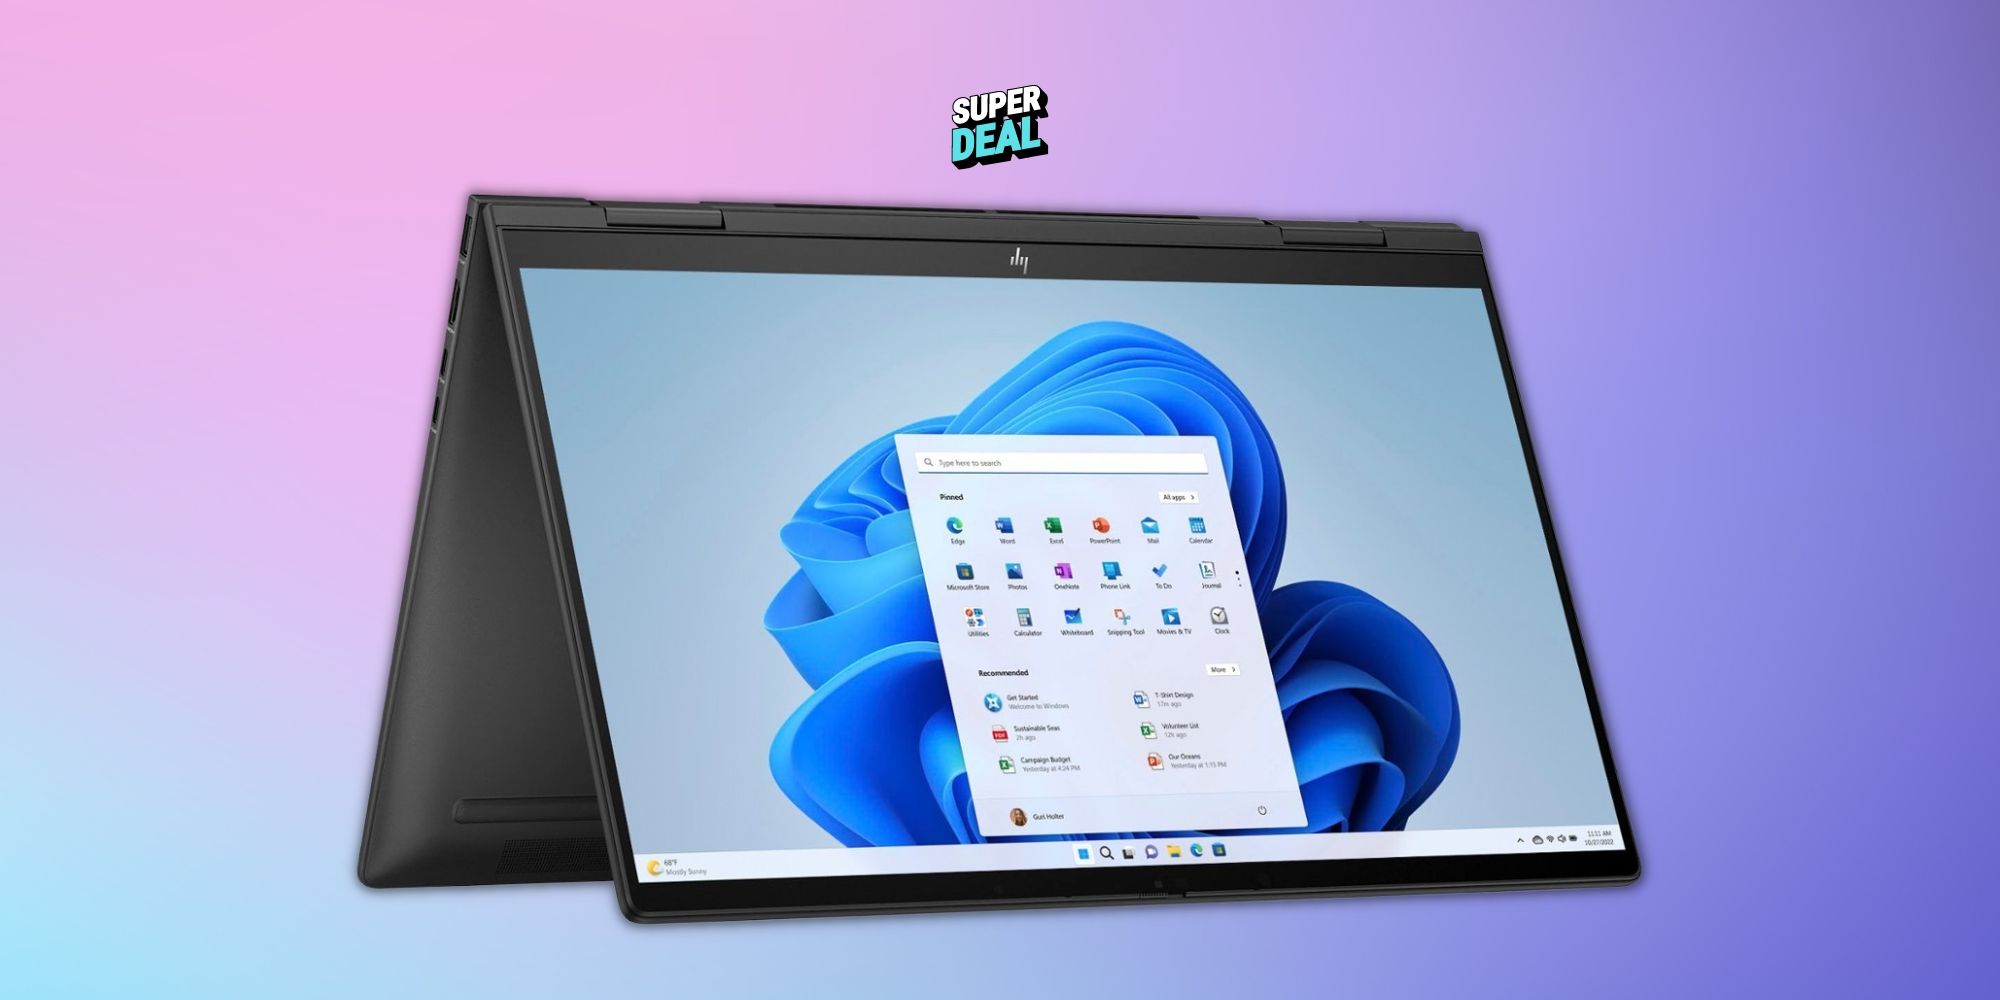 Image of the 15.6-inch HP Envy Convertible Laptop on a gradient background